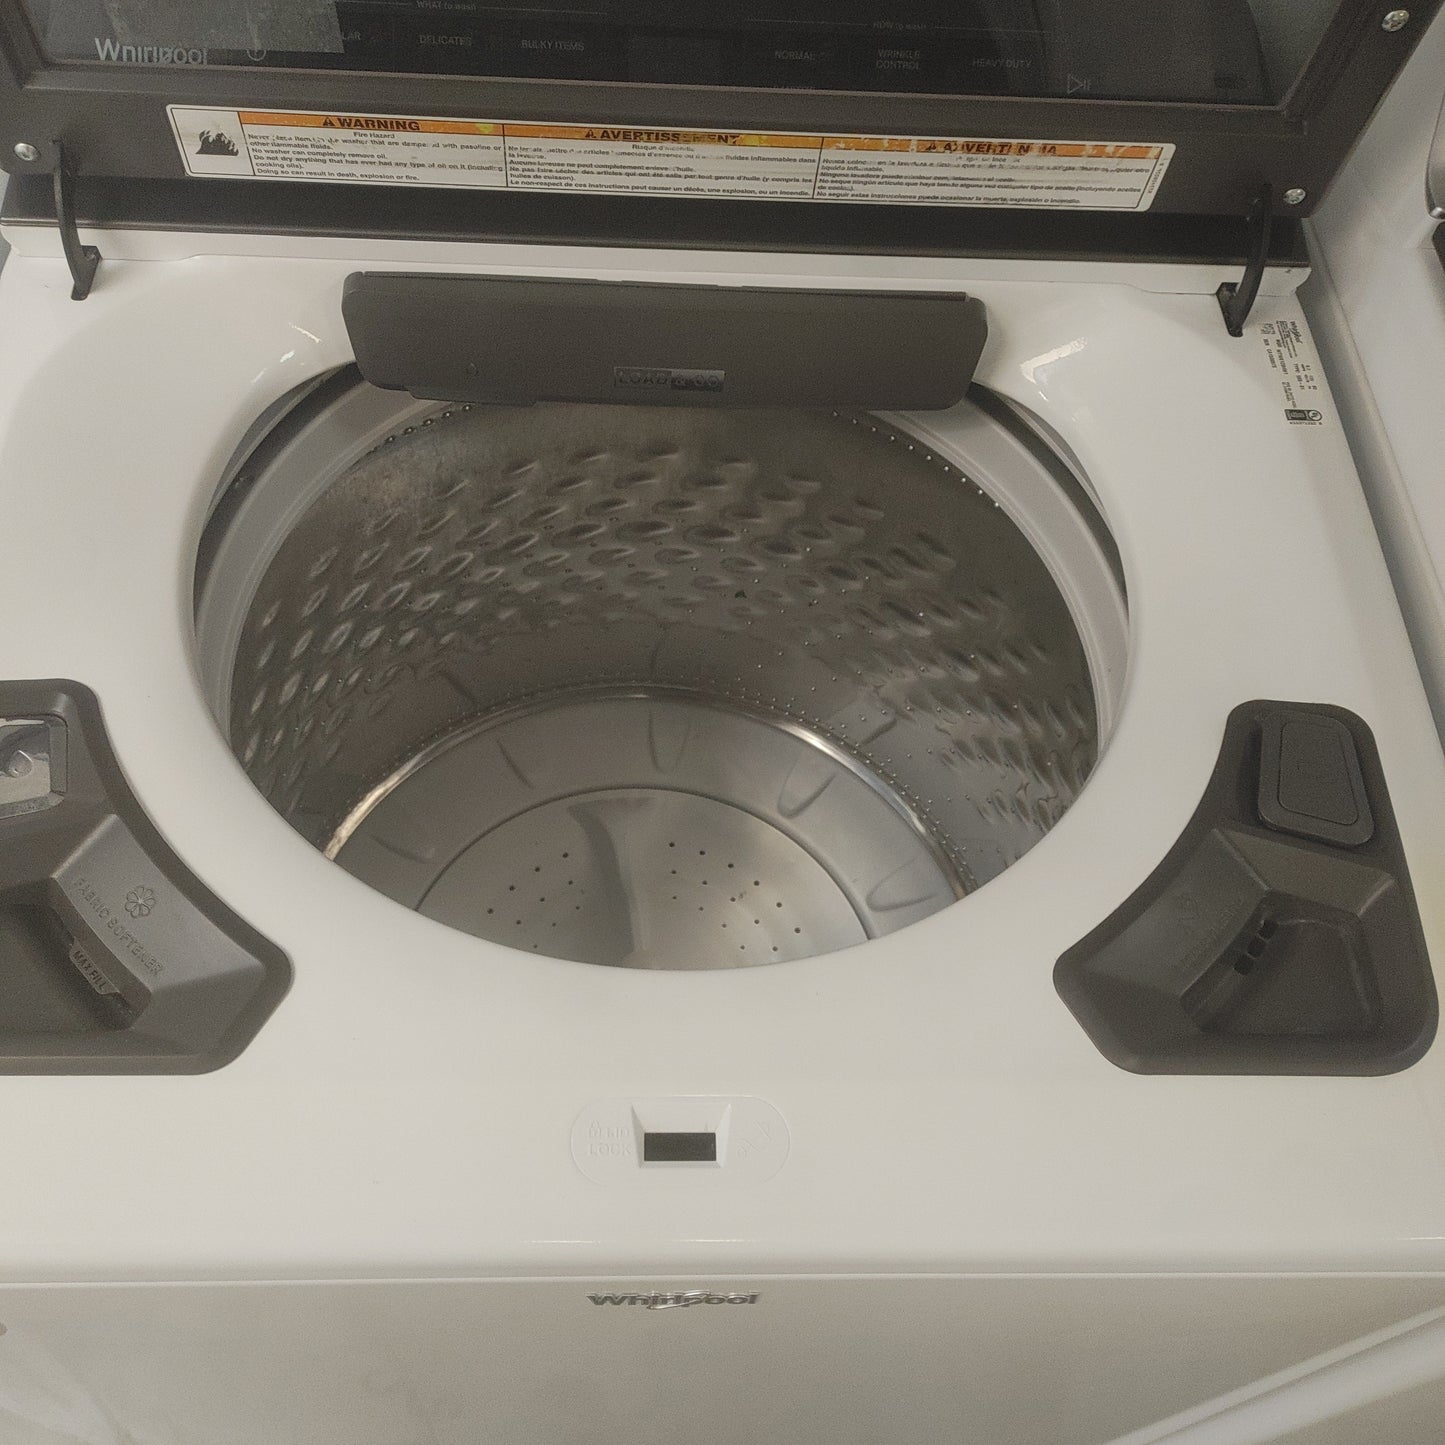 Used Whirlpool 4.8 cubic ft Top Load Impeller Washer with Remote Enable and Load & Go